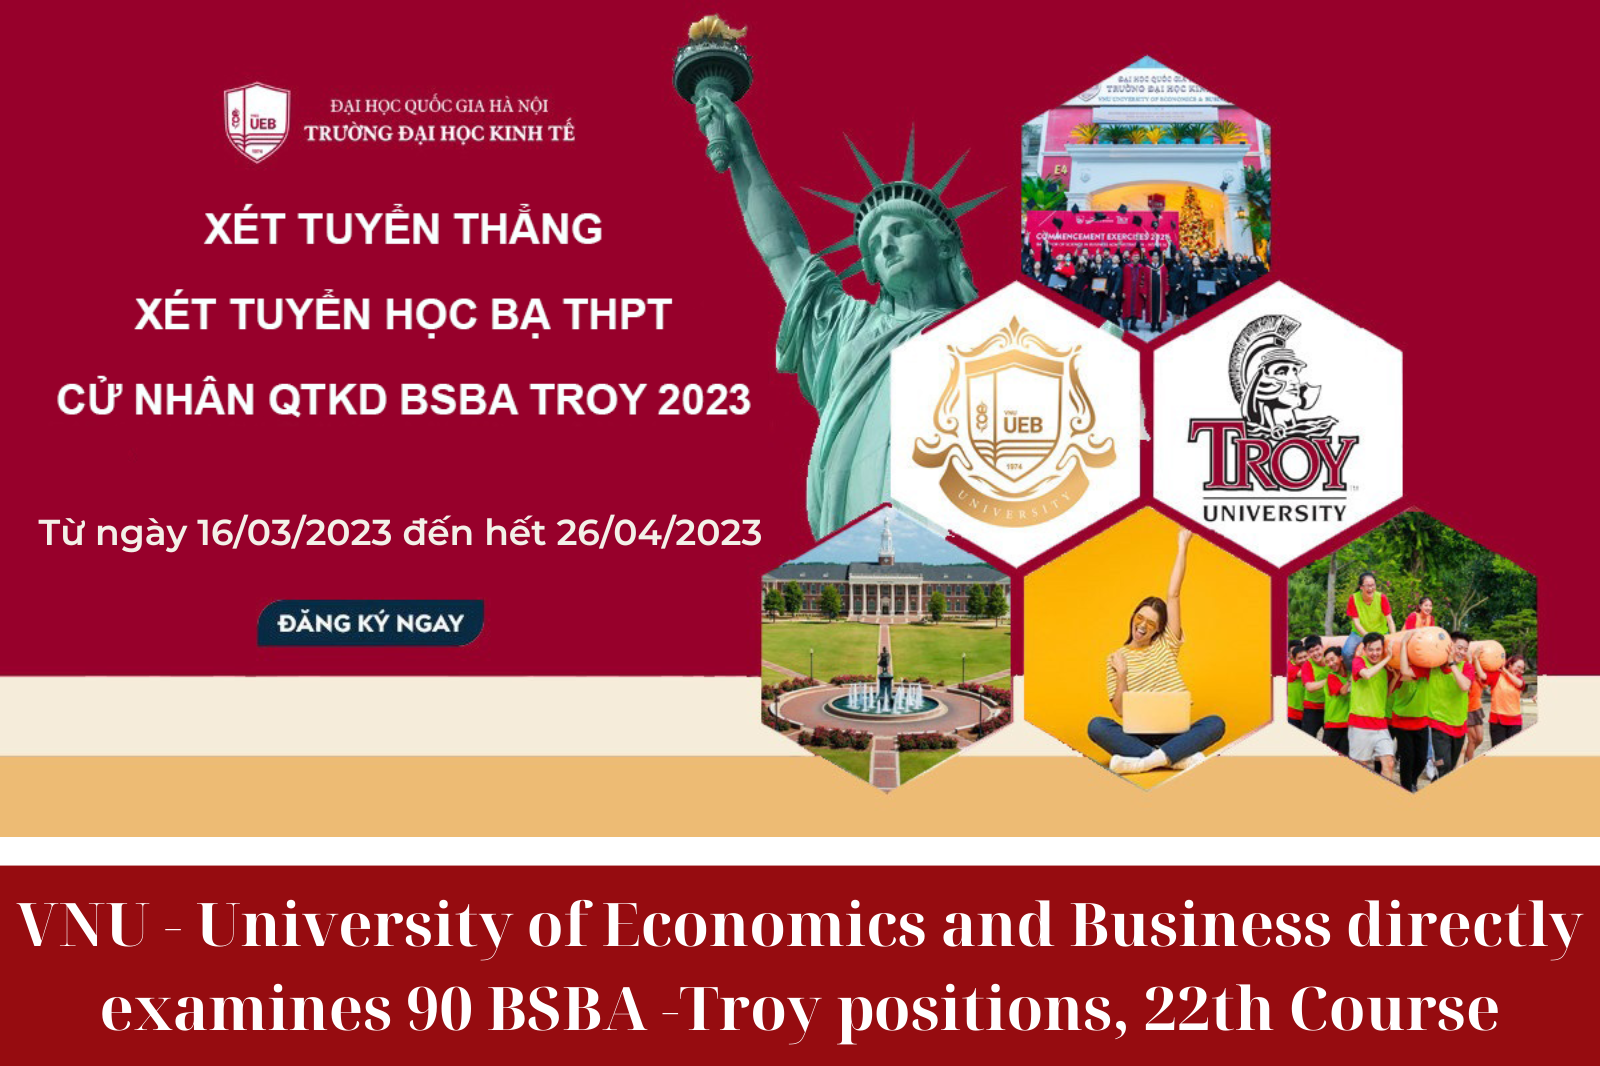 VNU - University of Economics and Business directly examines 90 BSBA -Troy positions, 22th Course